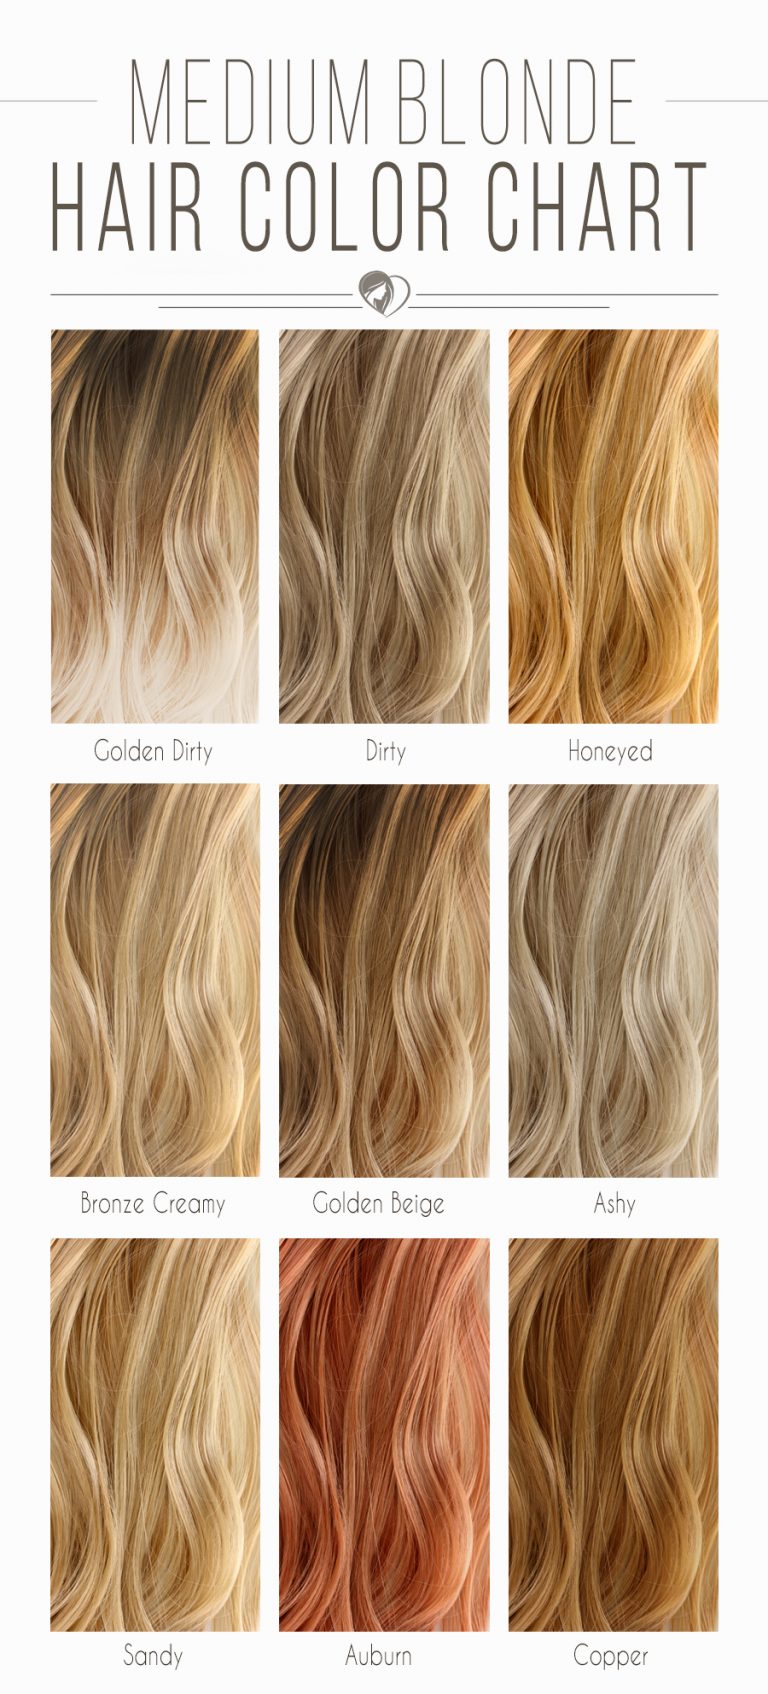 hair color chart lace front wig shop - the best hair color chart with ...